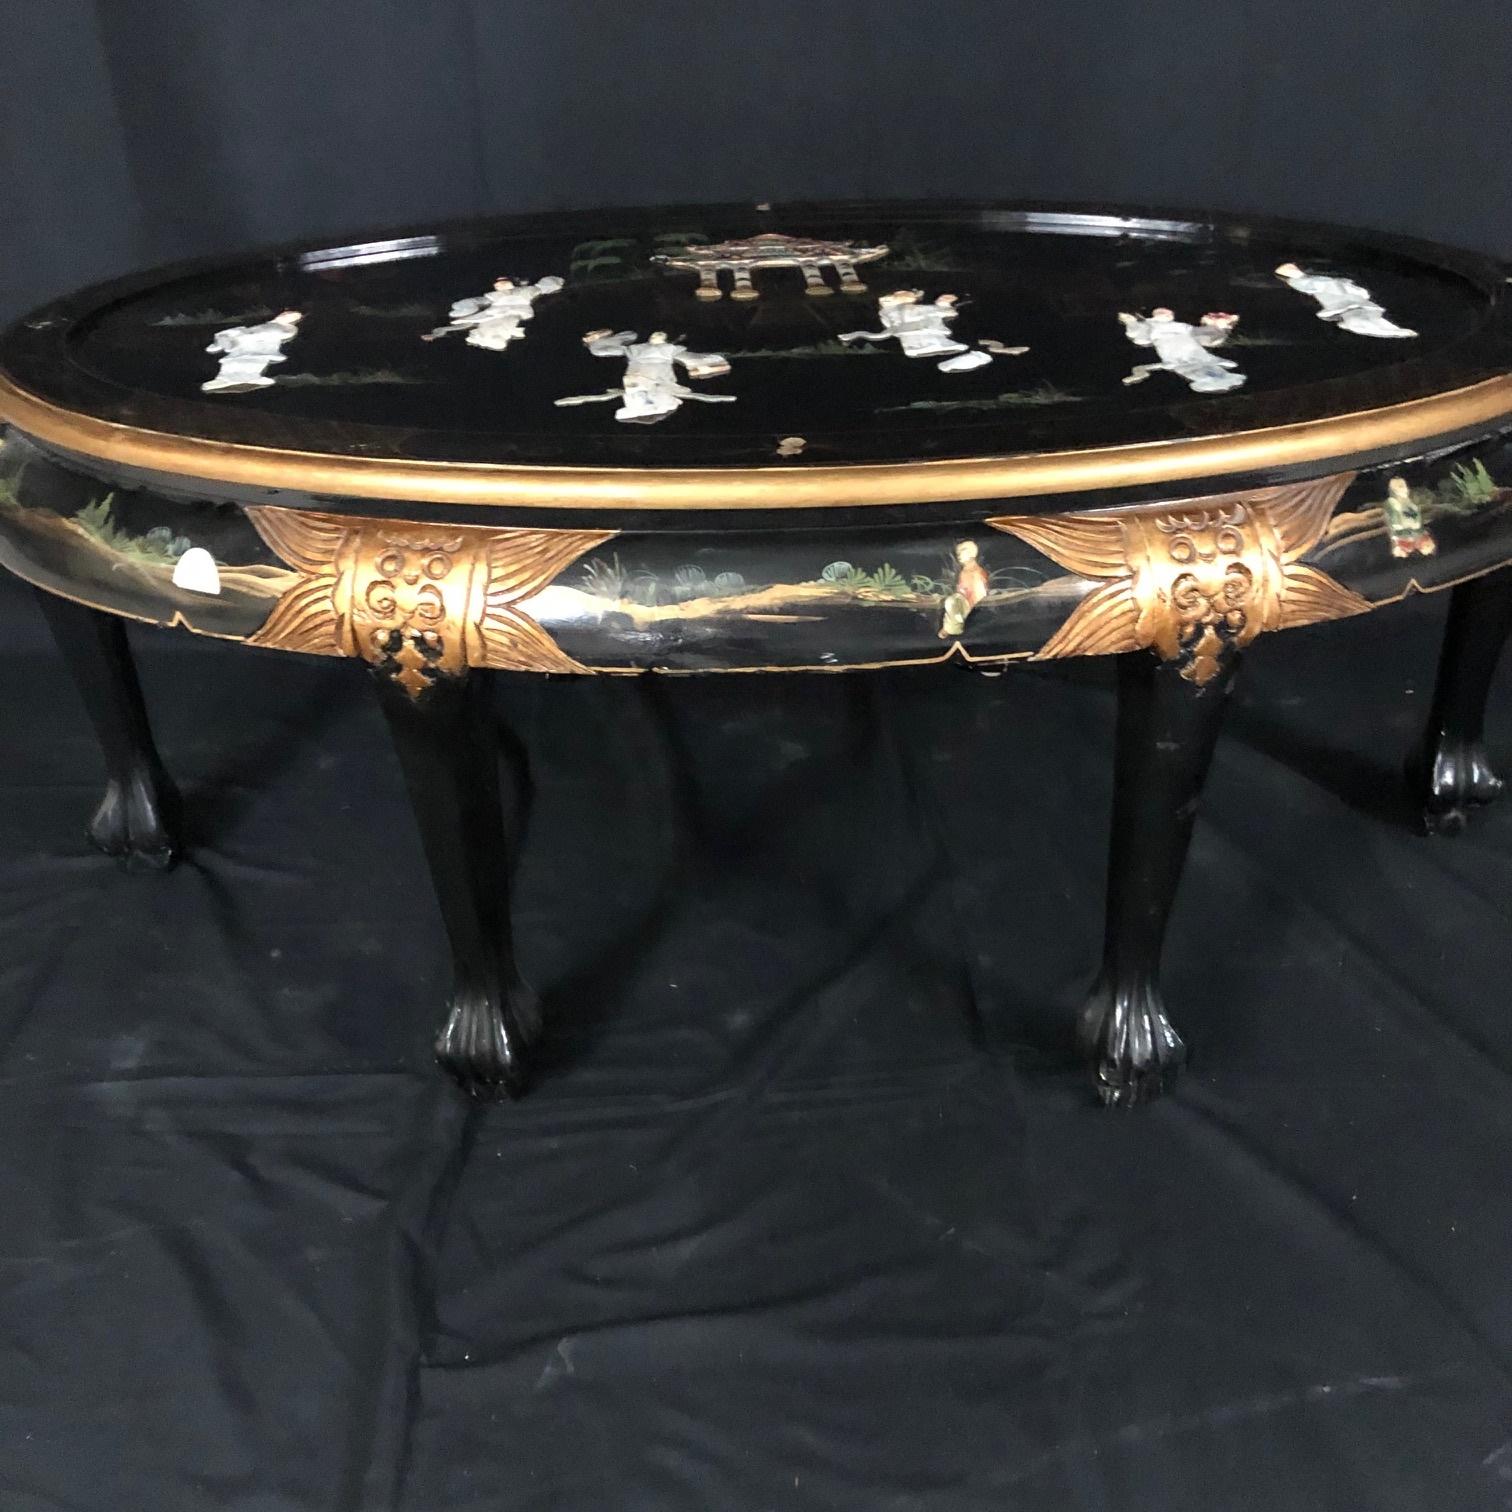 A beautiful vintage Chinese coffee table in lacquered and painted wood from the mid-20th C. The wooden, oval frame is decorated with painted floral details and stunning mother of pearl figural inlays. The intricate delicately sculpted mother of